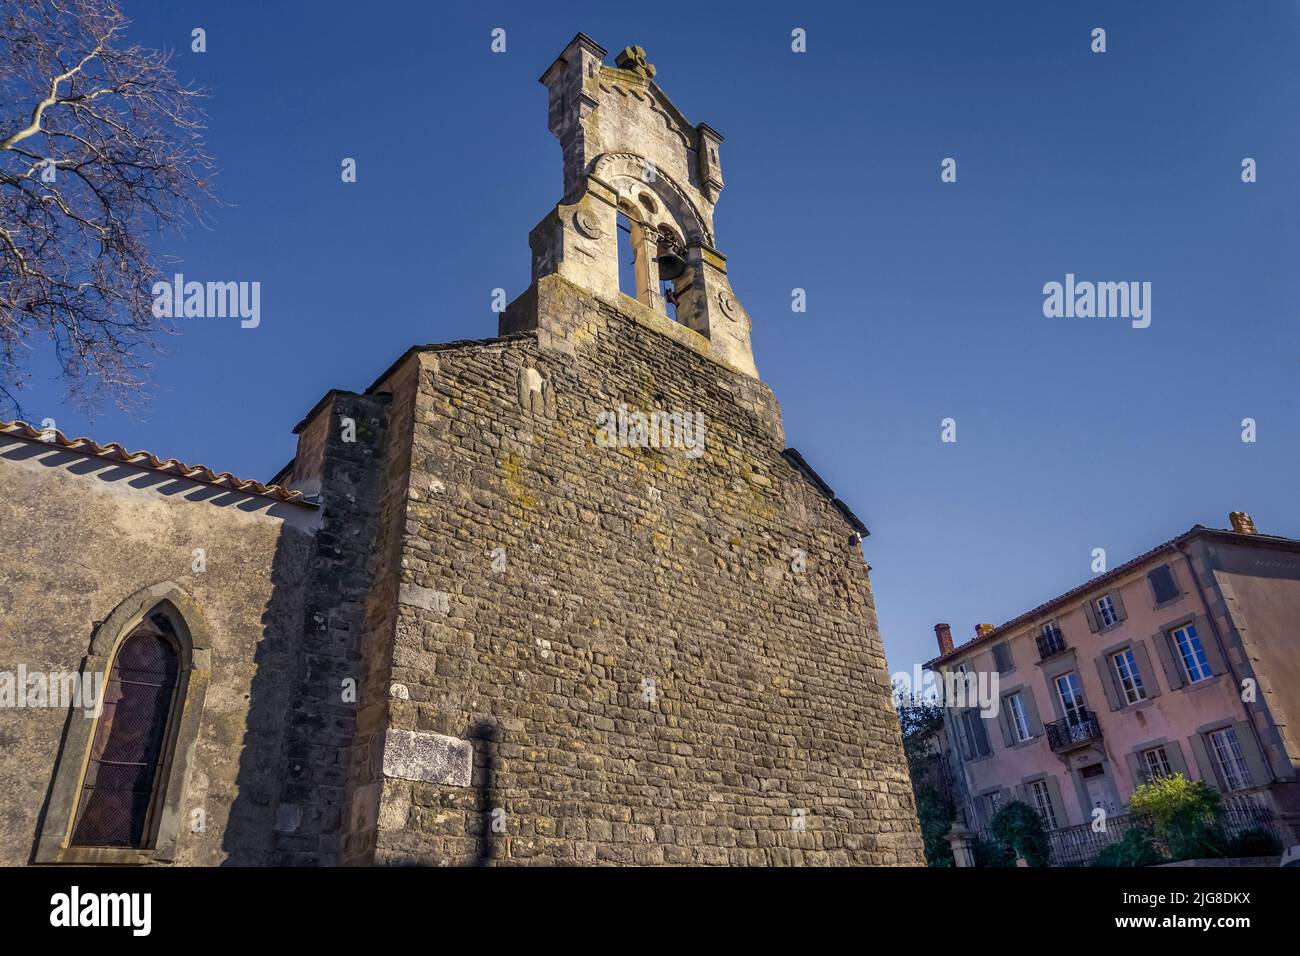 Bell tower of the parish church of Saint Cucufat in Saint Couat d'Aude. Built in the XII century in Romanesque style. Monument Historique. Stock Photo